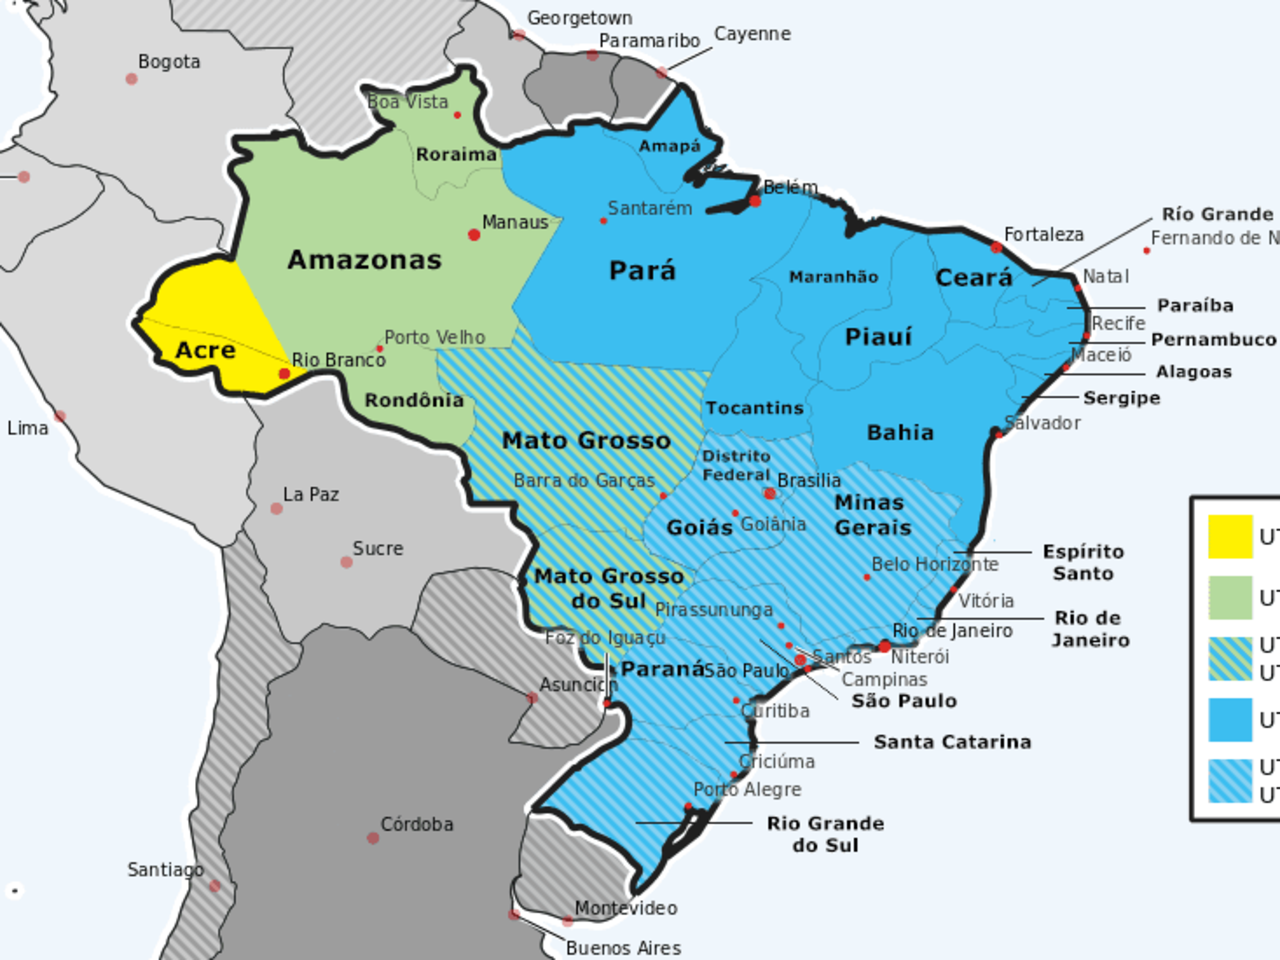 Is Brazil in the same timezone as New York? - Quora